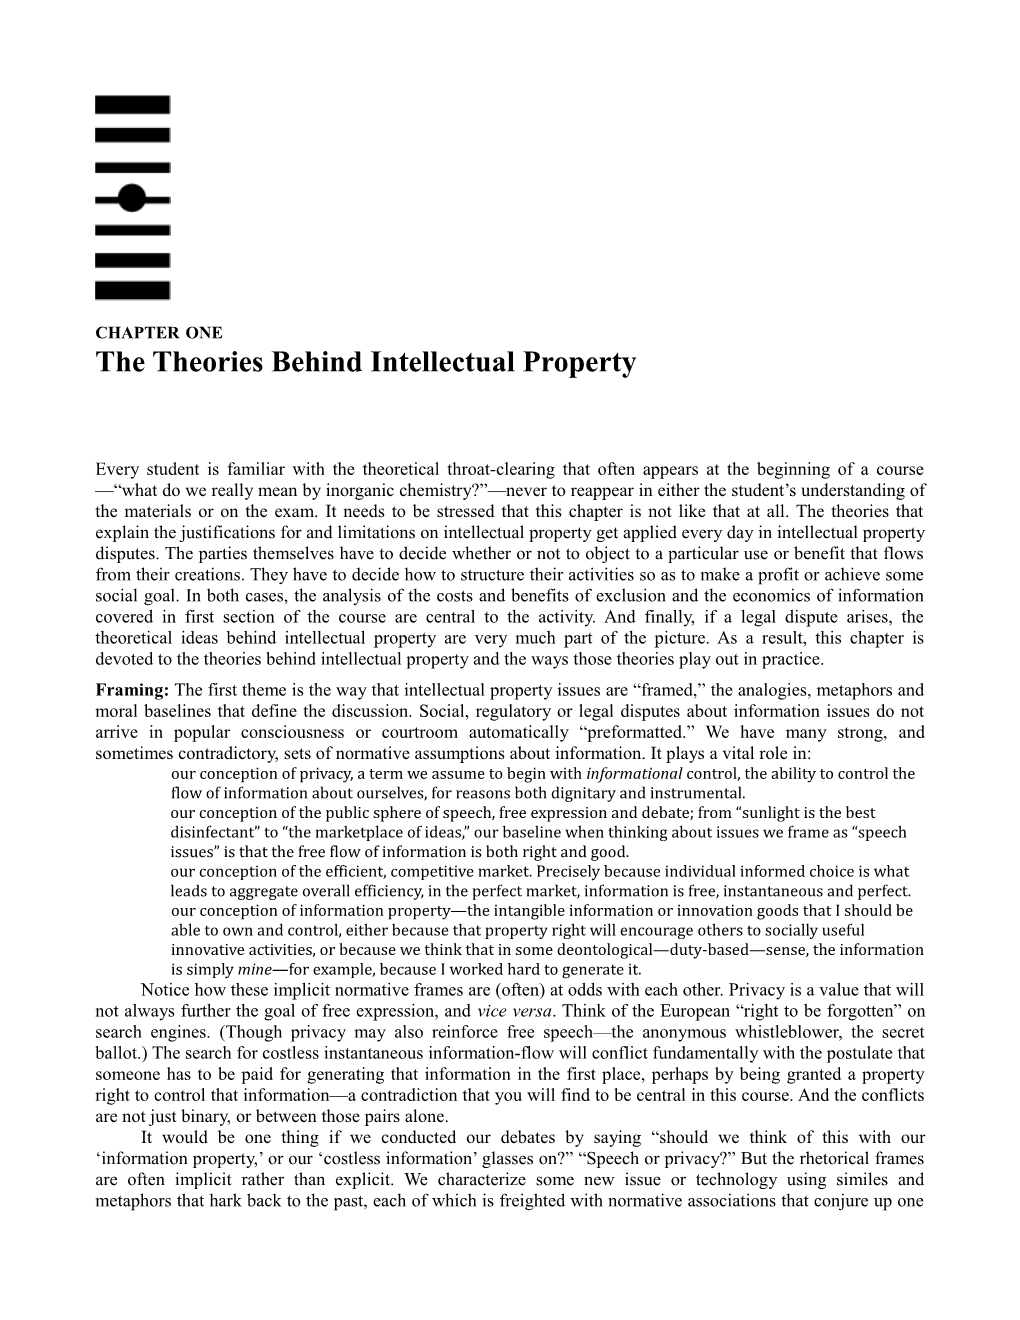 The Theories Behind Intellectual Property